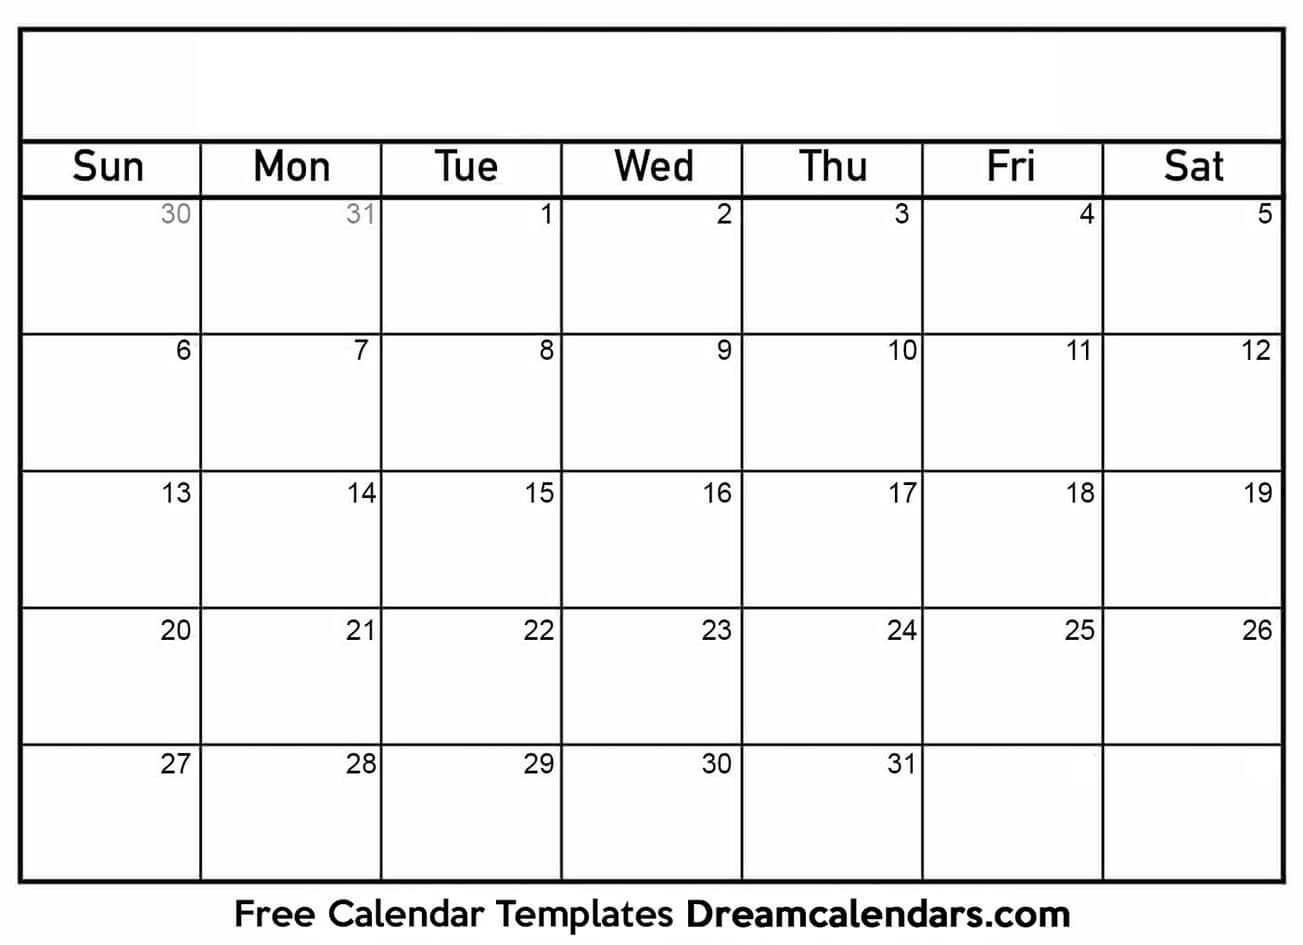 Incredible Blank Calendars With Days Of The Week Not for Blank Calendars With Days Of The Week Not Numbered